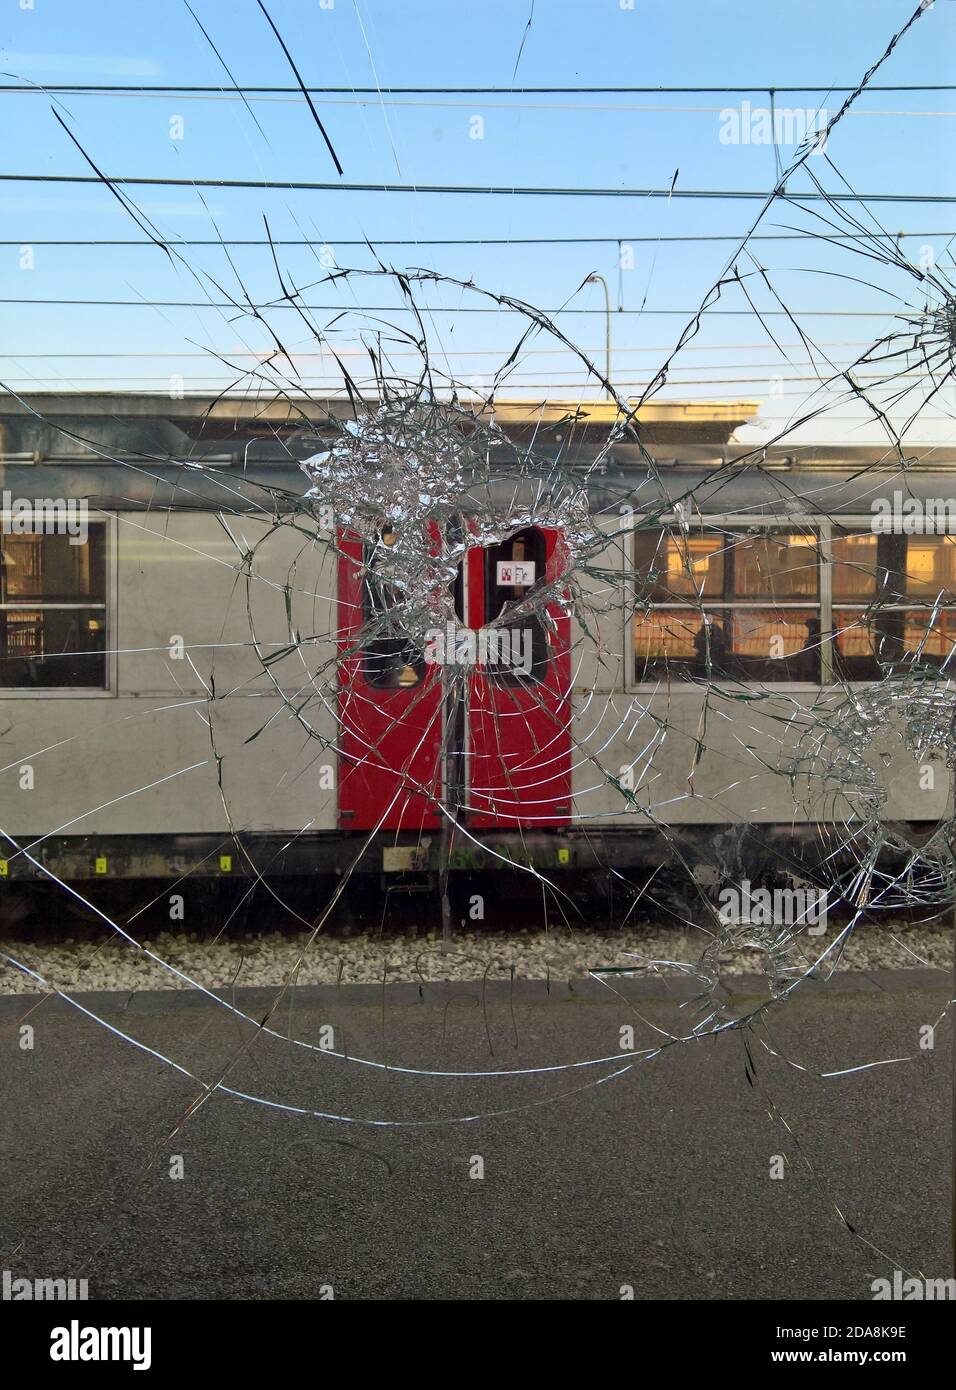 Looking at a train through broken glass in a window in this photo taken in southern Italy Stock Photo